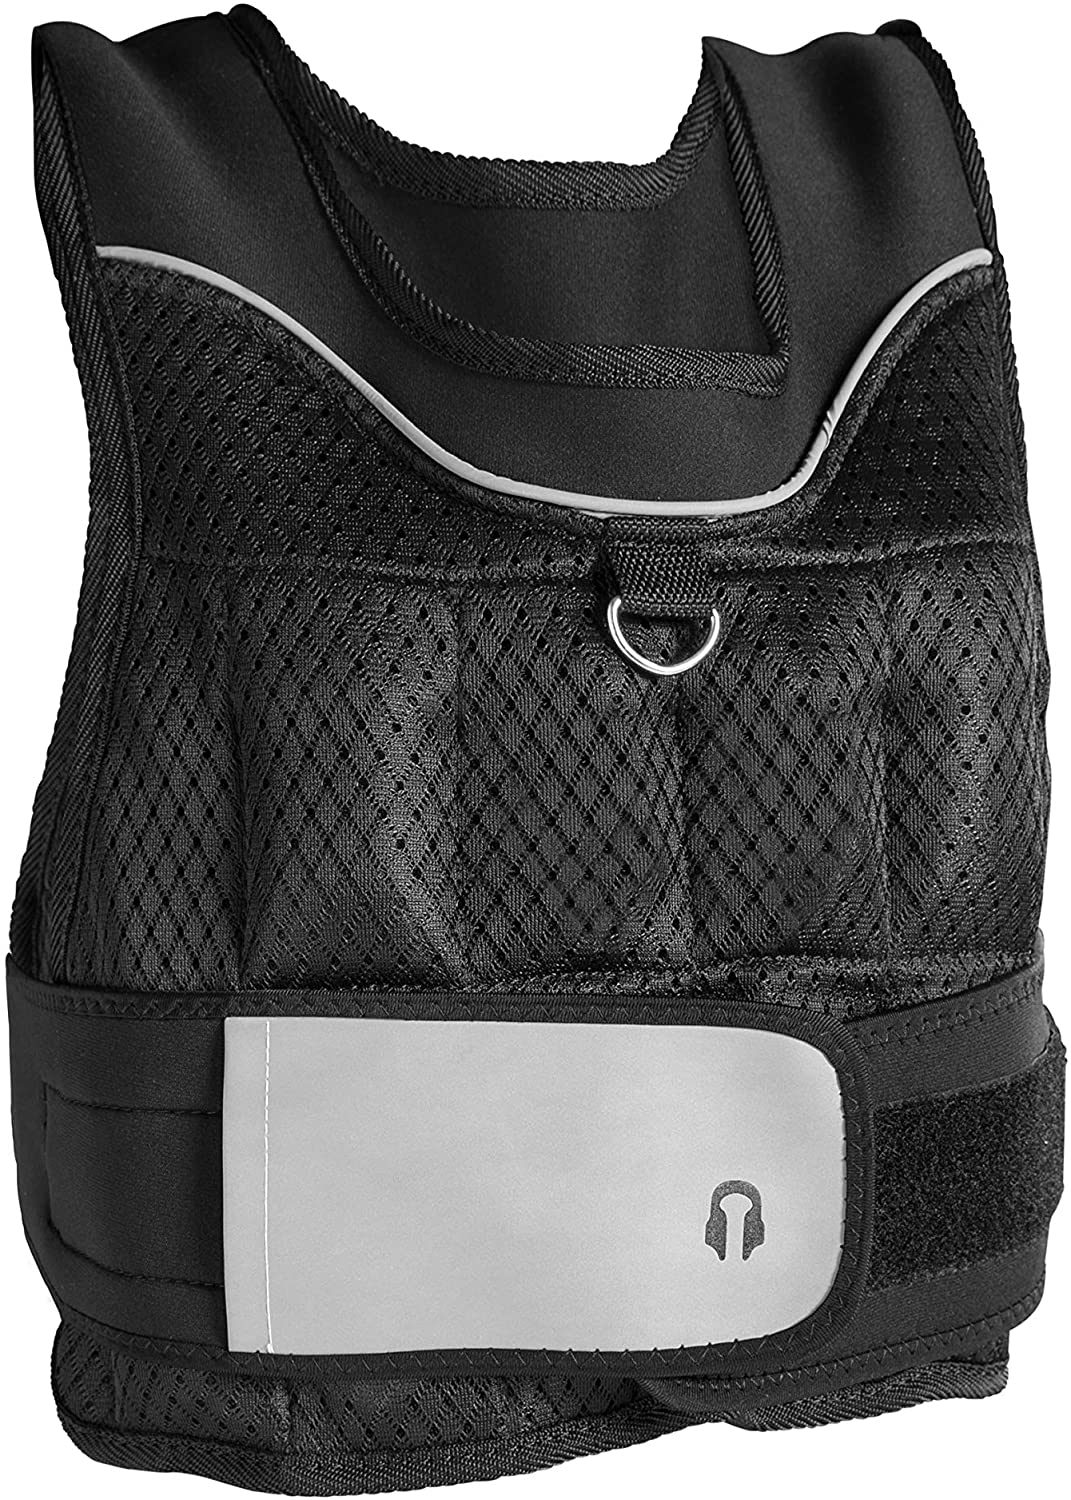 CAP Barbell 20 Lb. Adjustable Weighted Vest - image 2 of 6